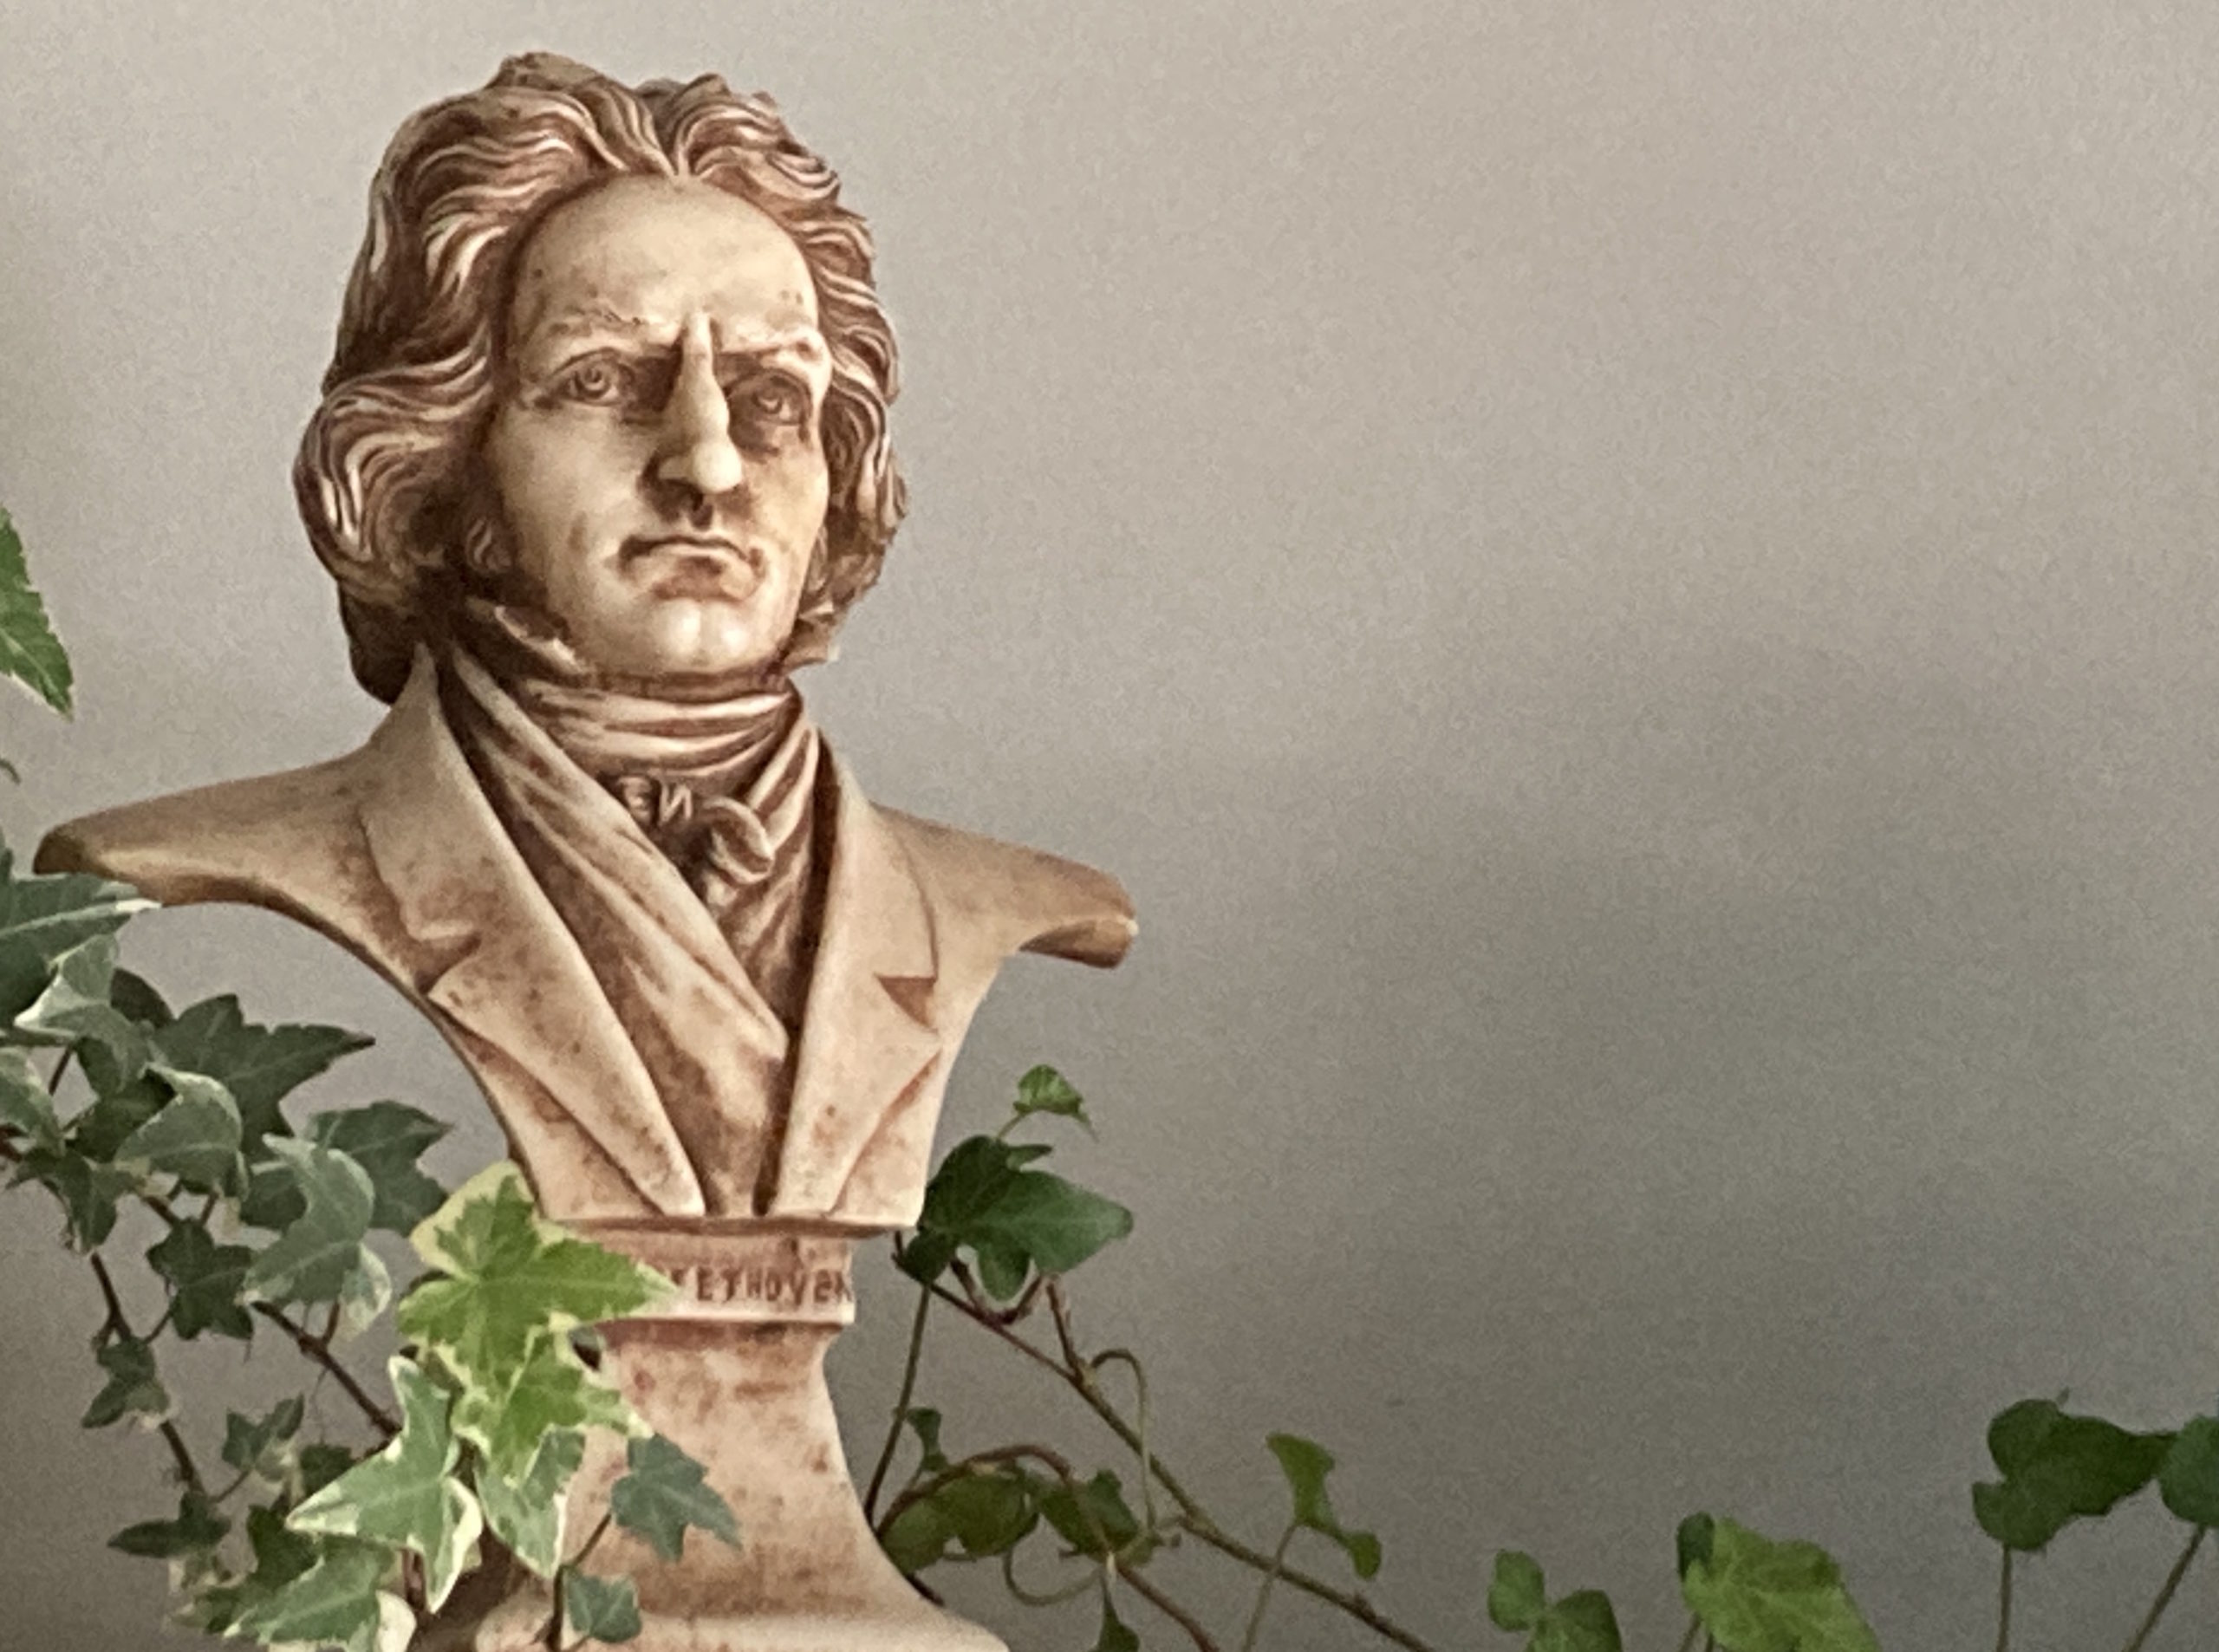 Beethoven, classical, bust, music, decor, composer